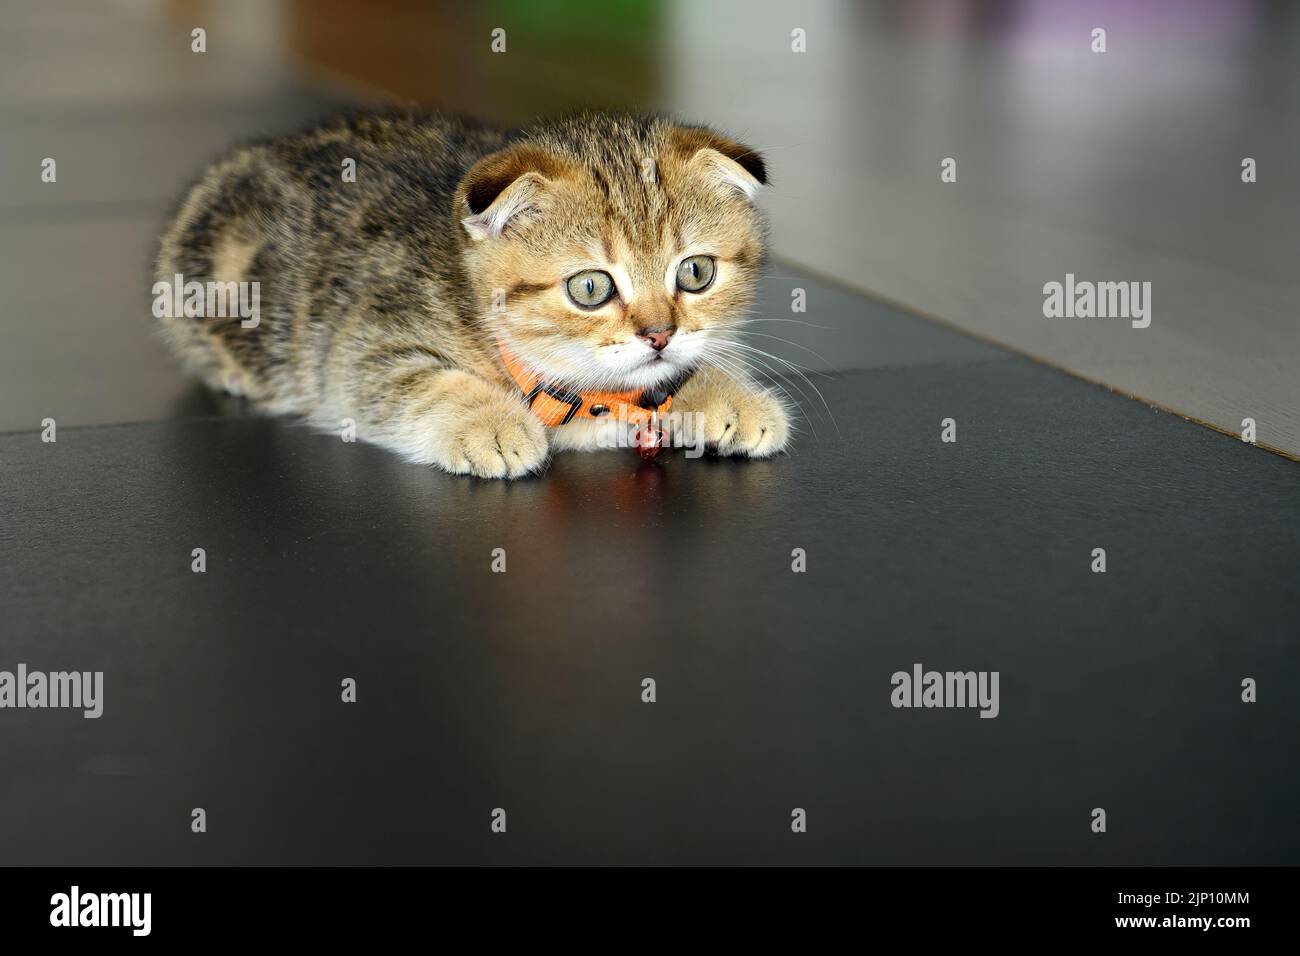 tabby cat crawling In ambush, Scottish Fold kitten in crouching position and ready to attack, cute little striped kitten. A good and beautiful pedigre Stock Photo